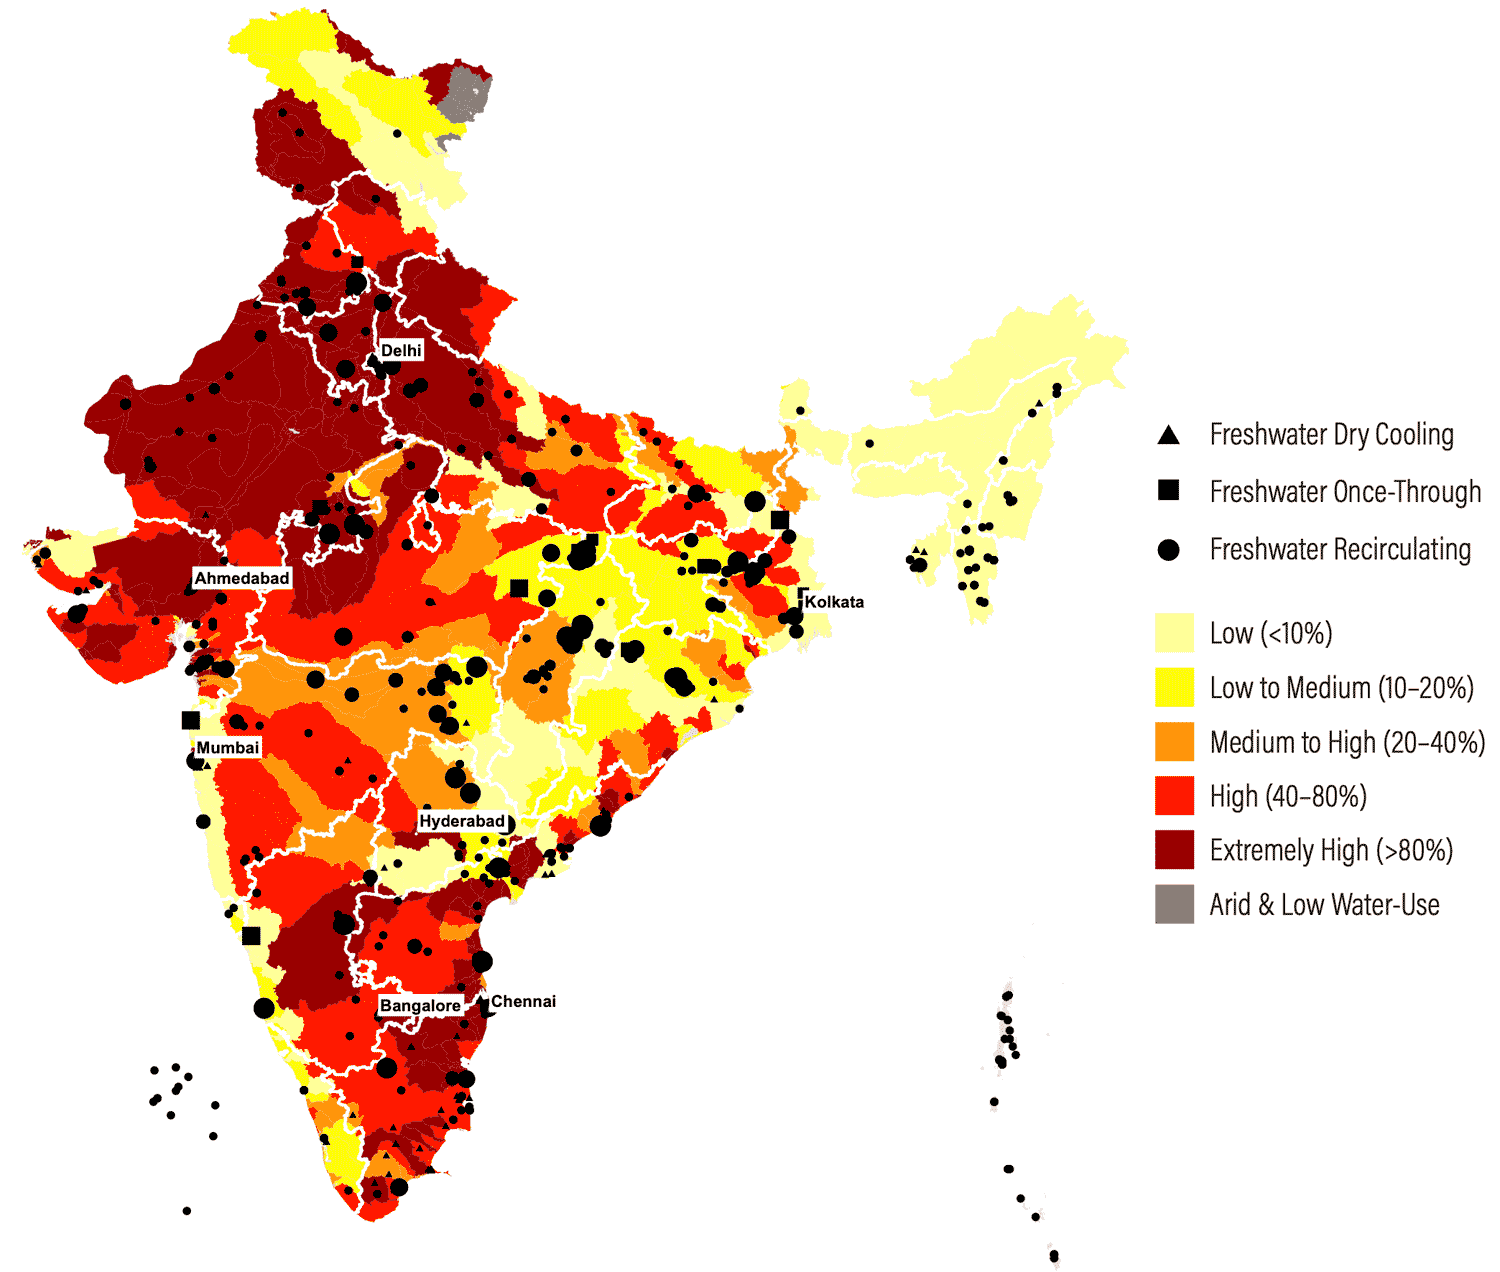 map of India's freshwater-cooled power plants